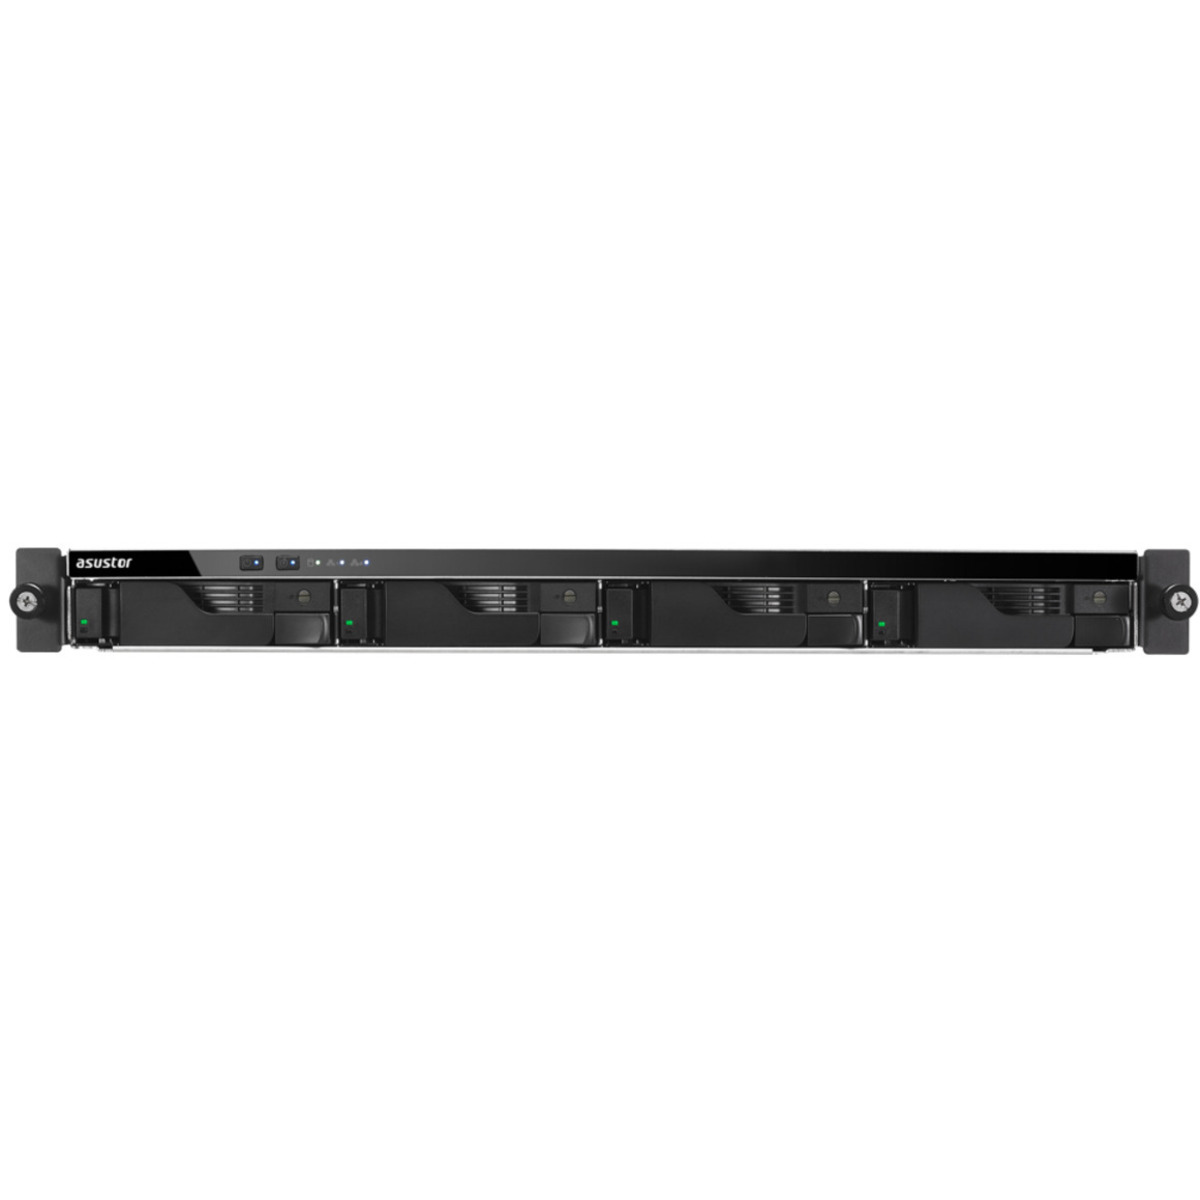 ASUSTOR LOCKERSTOR 4RS AS6504RS 40tb 4-Bay RackMount Multimedia / Power User / Business NAS - Network Attached Storage Device 4x10tb Seagate IronWolf Pro ST10000NT001 3.5 7200rpm SATA 6Gb/s HDD NAS Class Drives Installed - Burn-In Tested - ON SALE - FREE RAM UPGRADE LOCKERSTOR 4RS AS6504RS